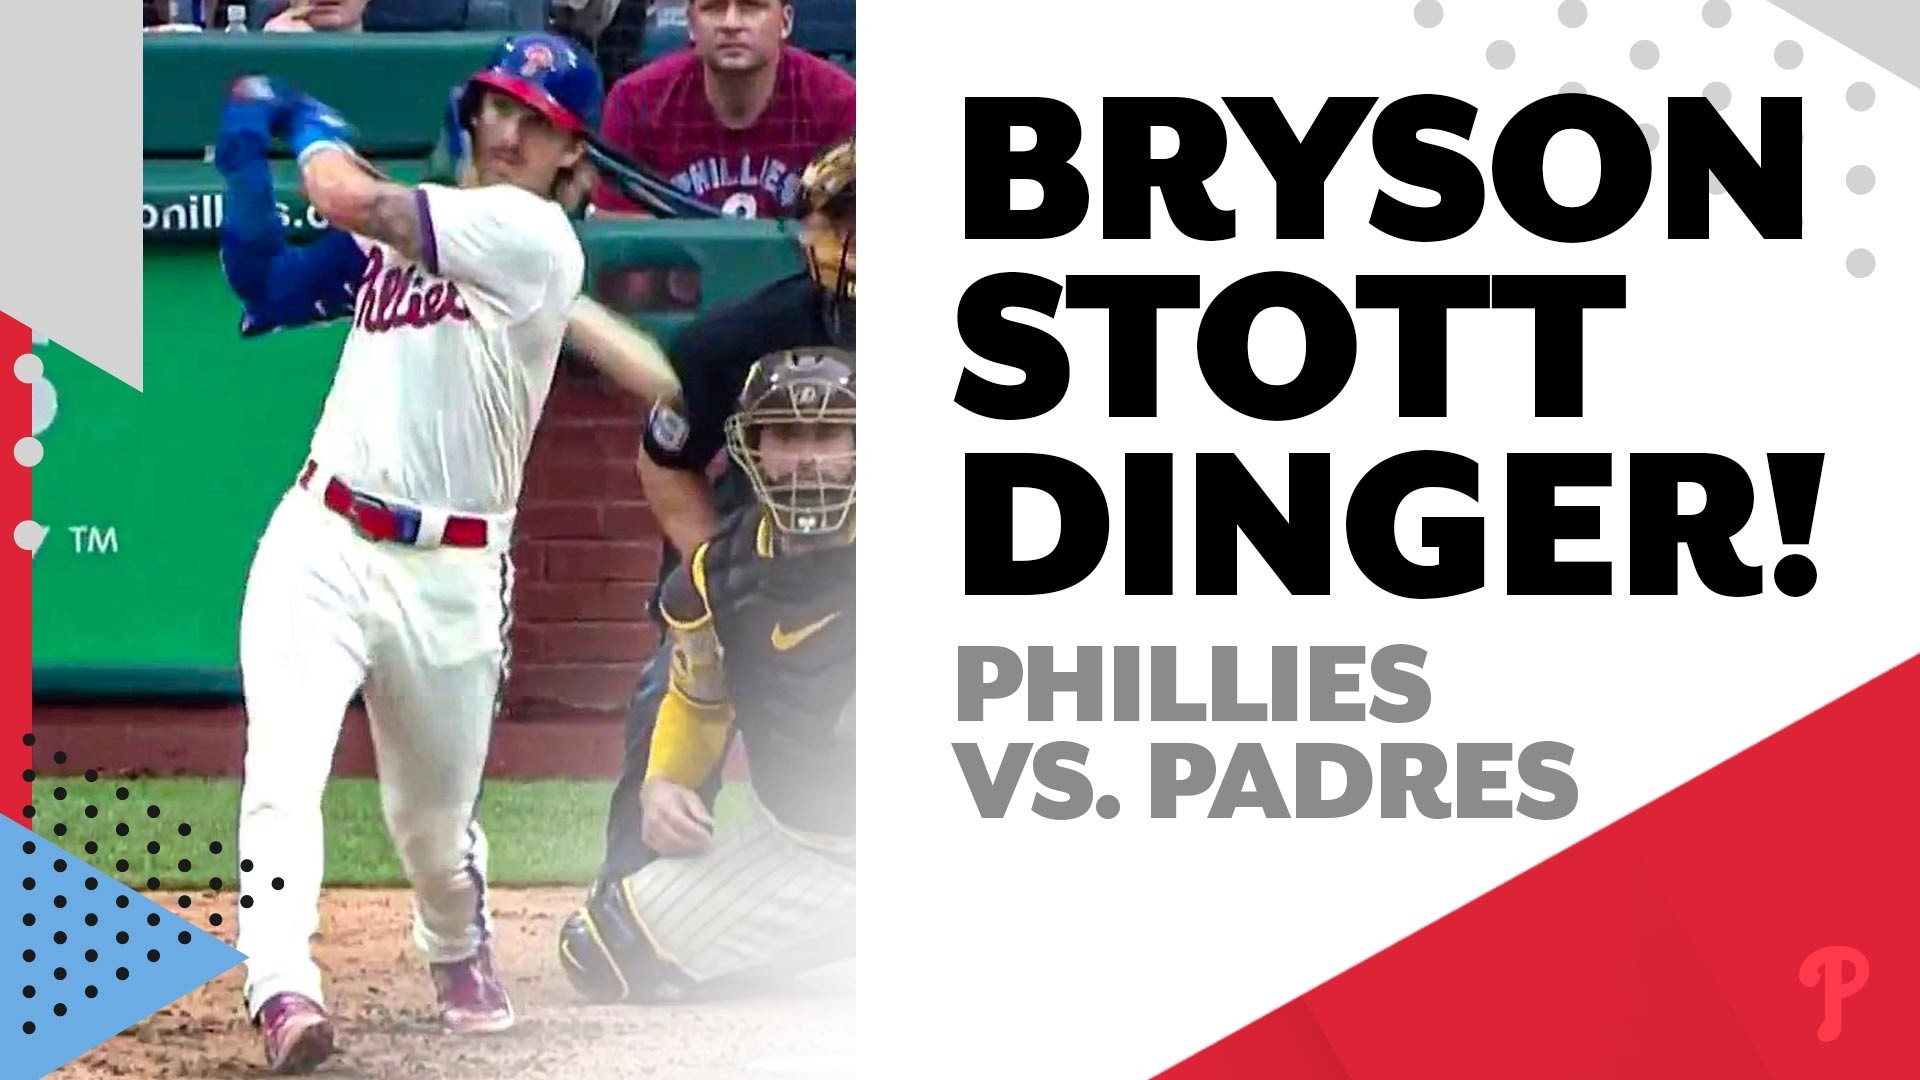 With feet and glove, Bryson Stott makes a difference for Phillies in Game 5